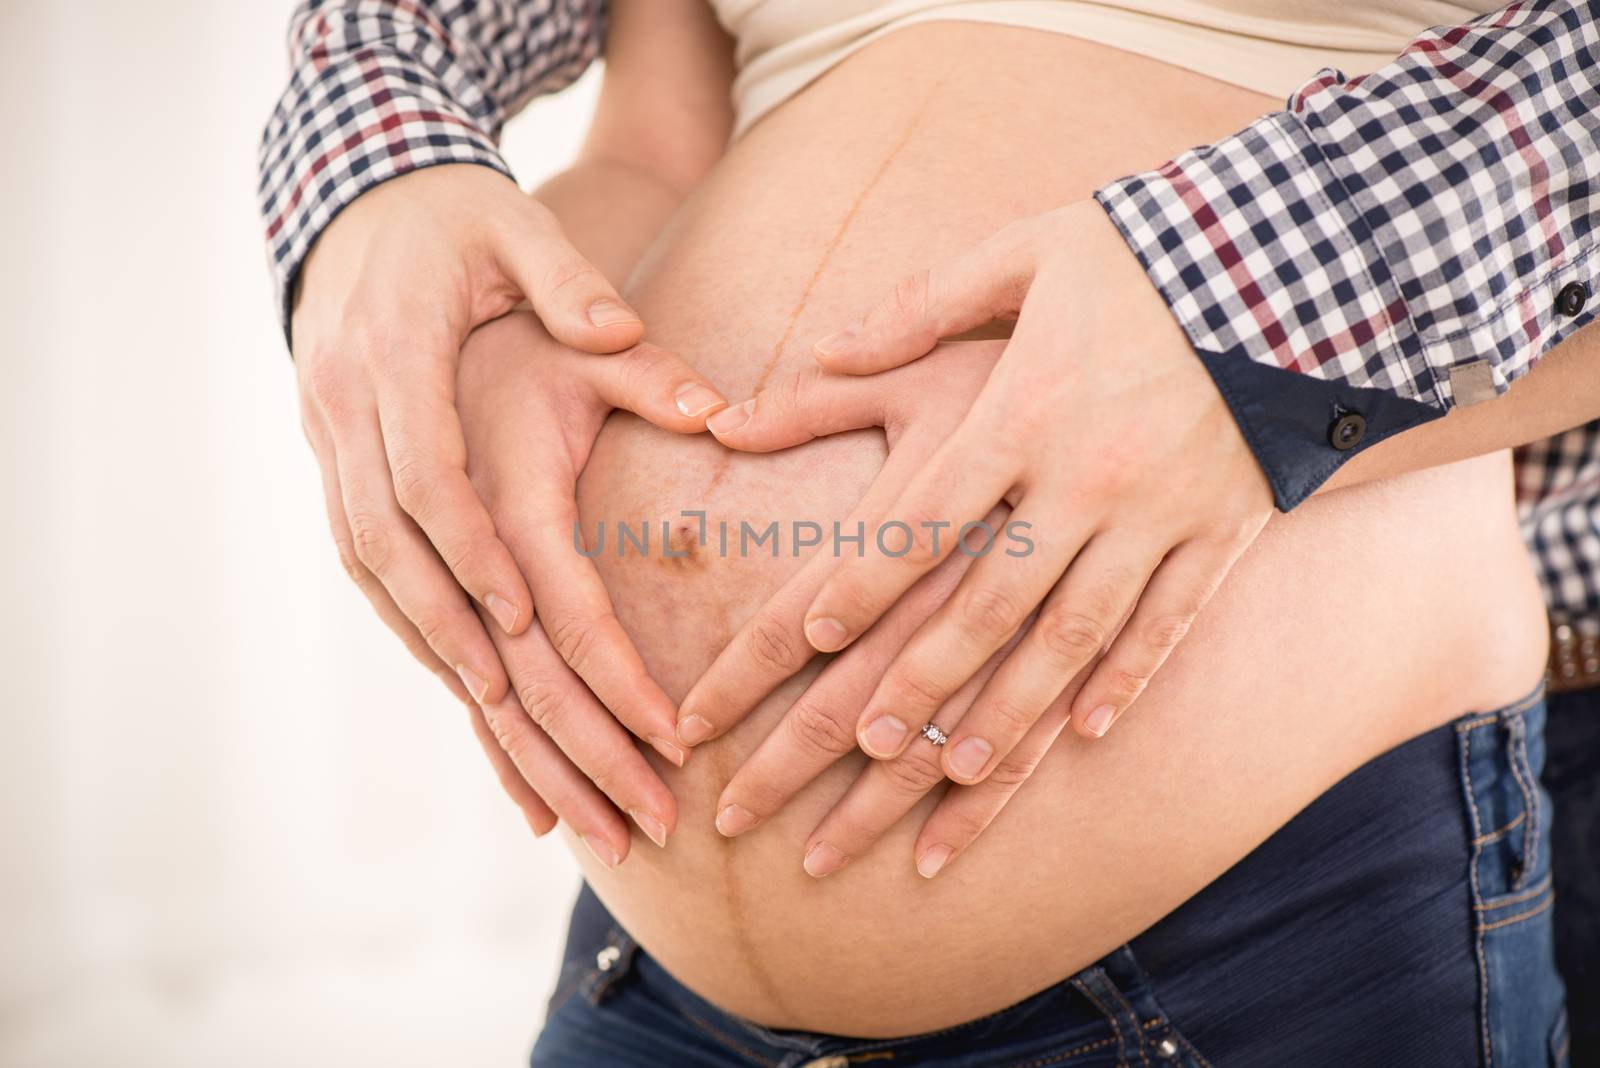 Male and female hands making a heart shape on the woman's pregnant belly. Close-up.